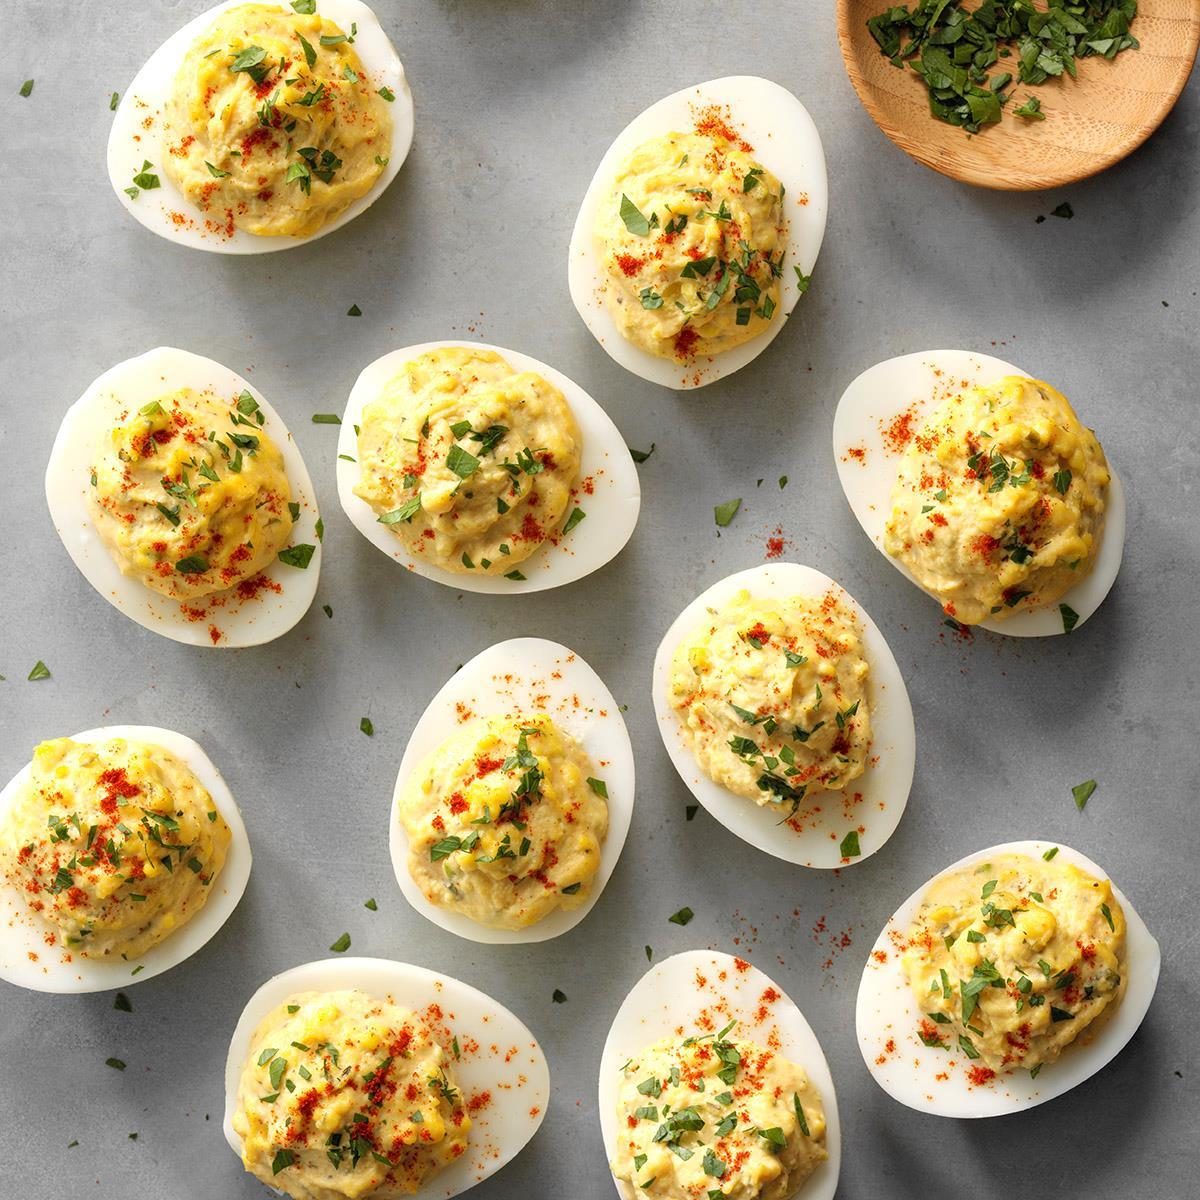 Deviled eggs are an Easter classic. Source: Taste of Home